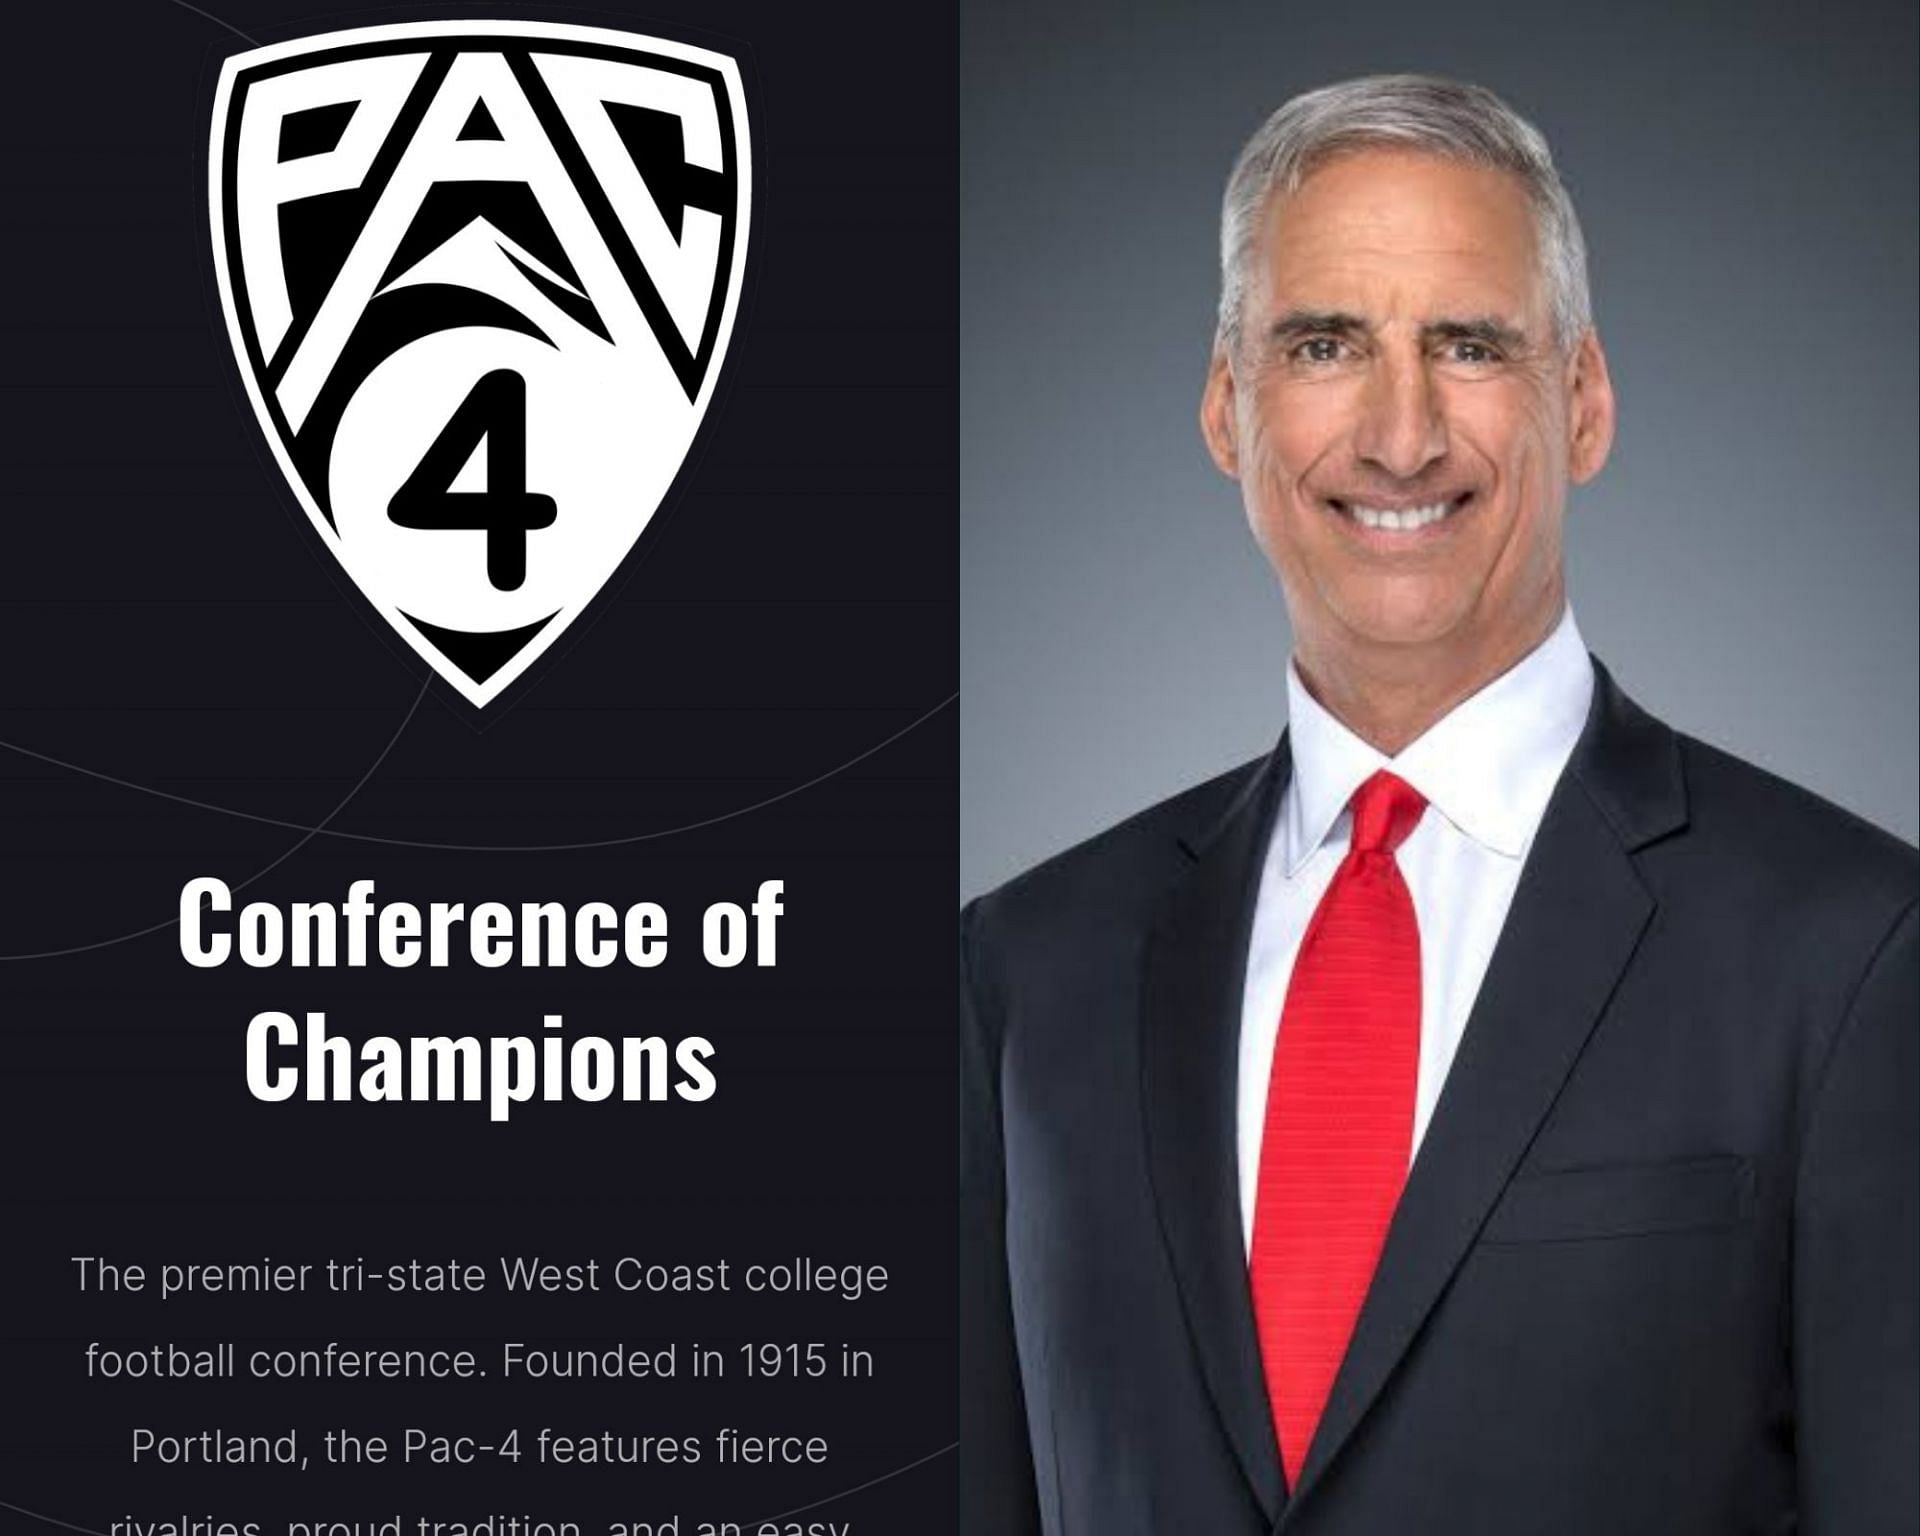 Oliver Luck was brought in to chart a way forward for the Pac-4